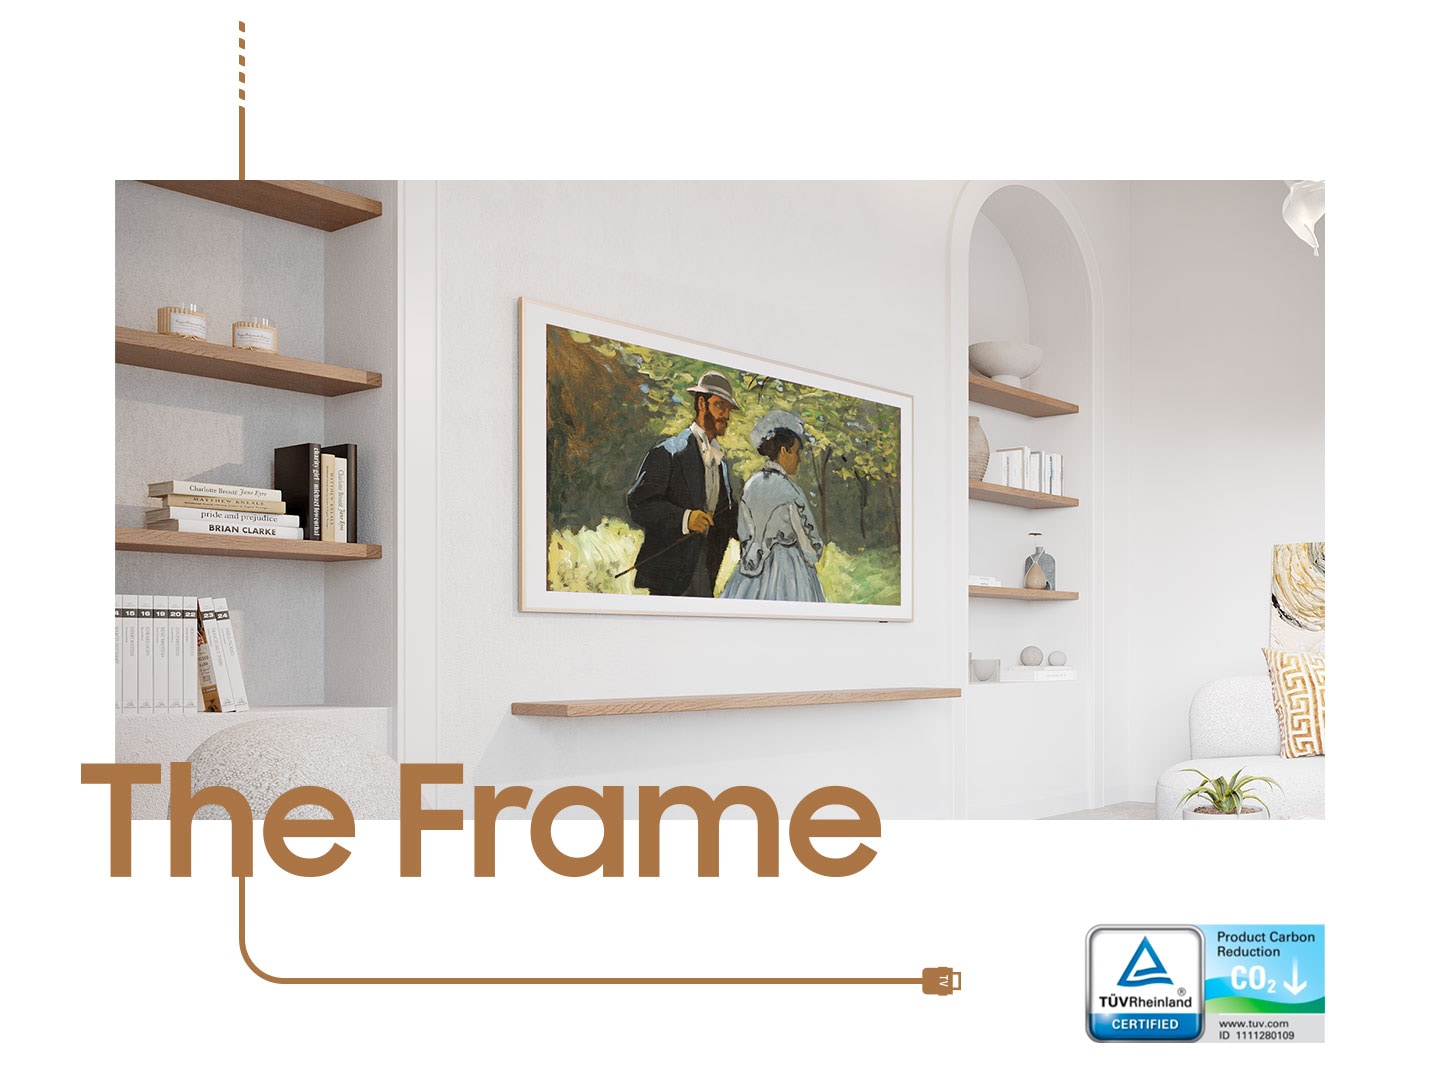 The Frame hangs on a wall in the living room, displaying a painting of a couple on screen.
A Product Carbon Reduction logo by TUVRheinland CERTIFIED is on the lower right side.